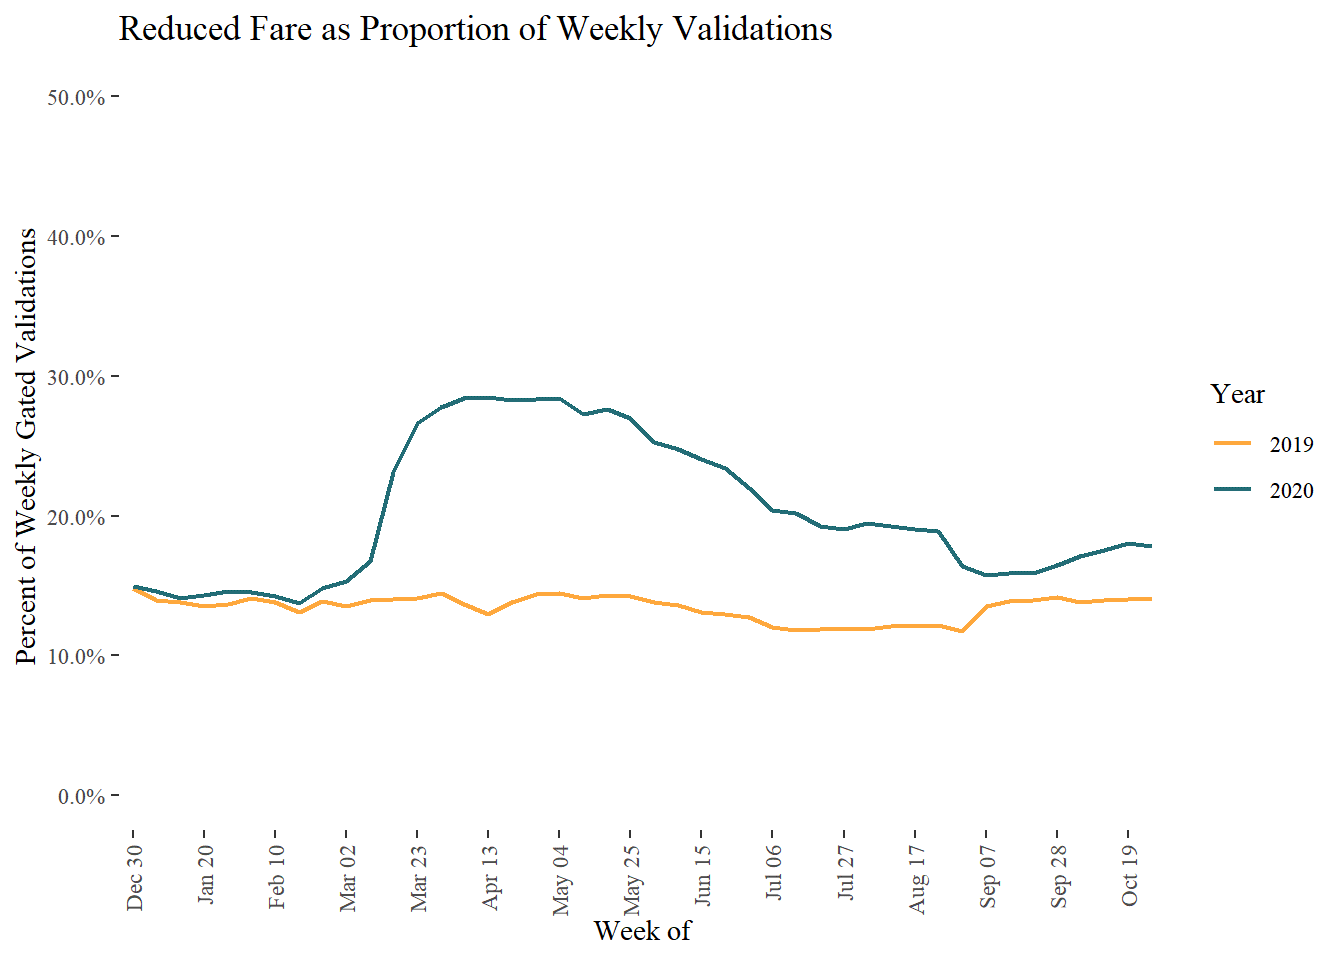 Chart showing reduced fare validations as a proportion of all validations, comparing 2019 and 2020